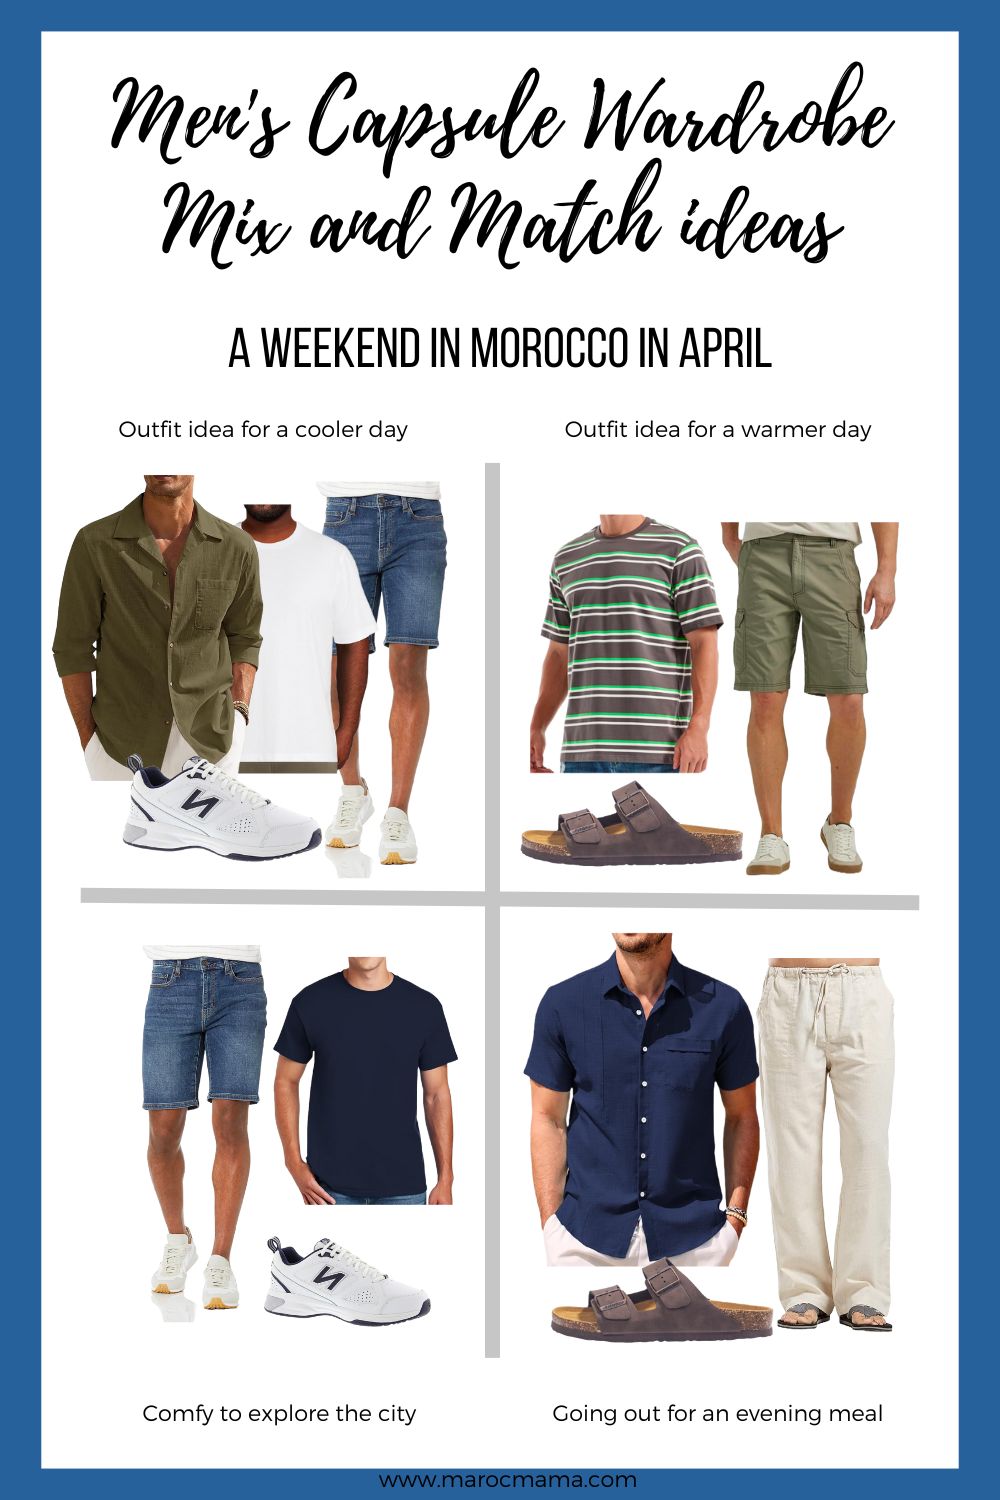 Men's capsule wardrobe mix and match ideas, April in Morocco